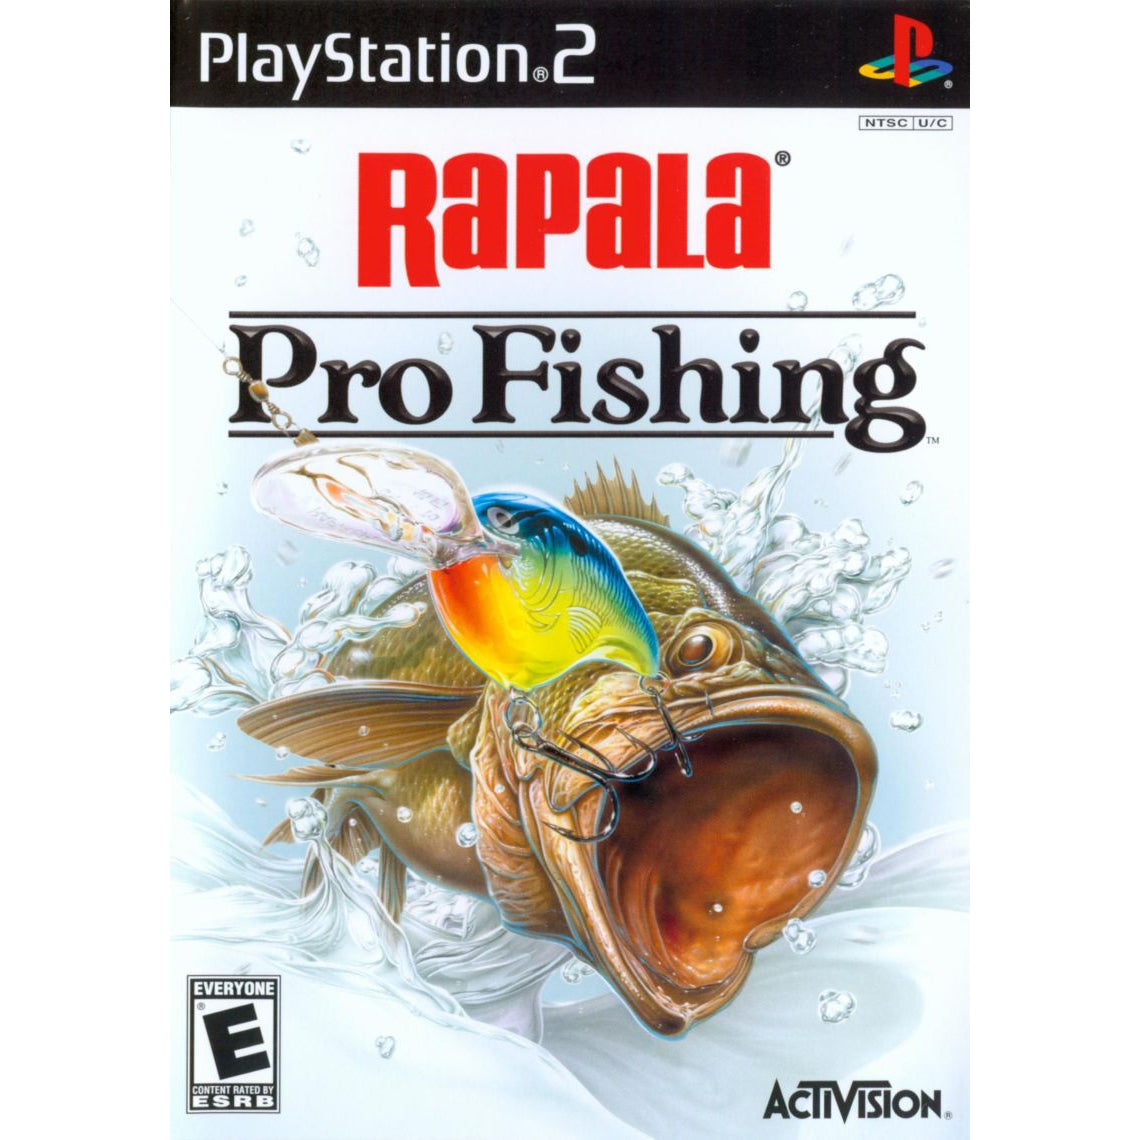 Rapala Pro Fishing - PlayStation 2 (PS2) Game Complete - YourGamingShop.com - Buy, Sell, Trade Video Games Online. 120 Day Warranty. Satisfaction Guaranteed.